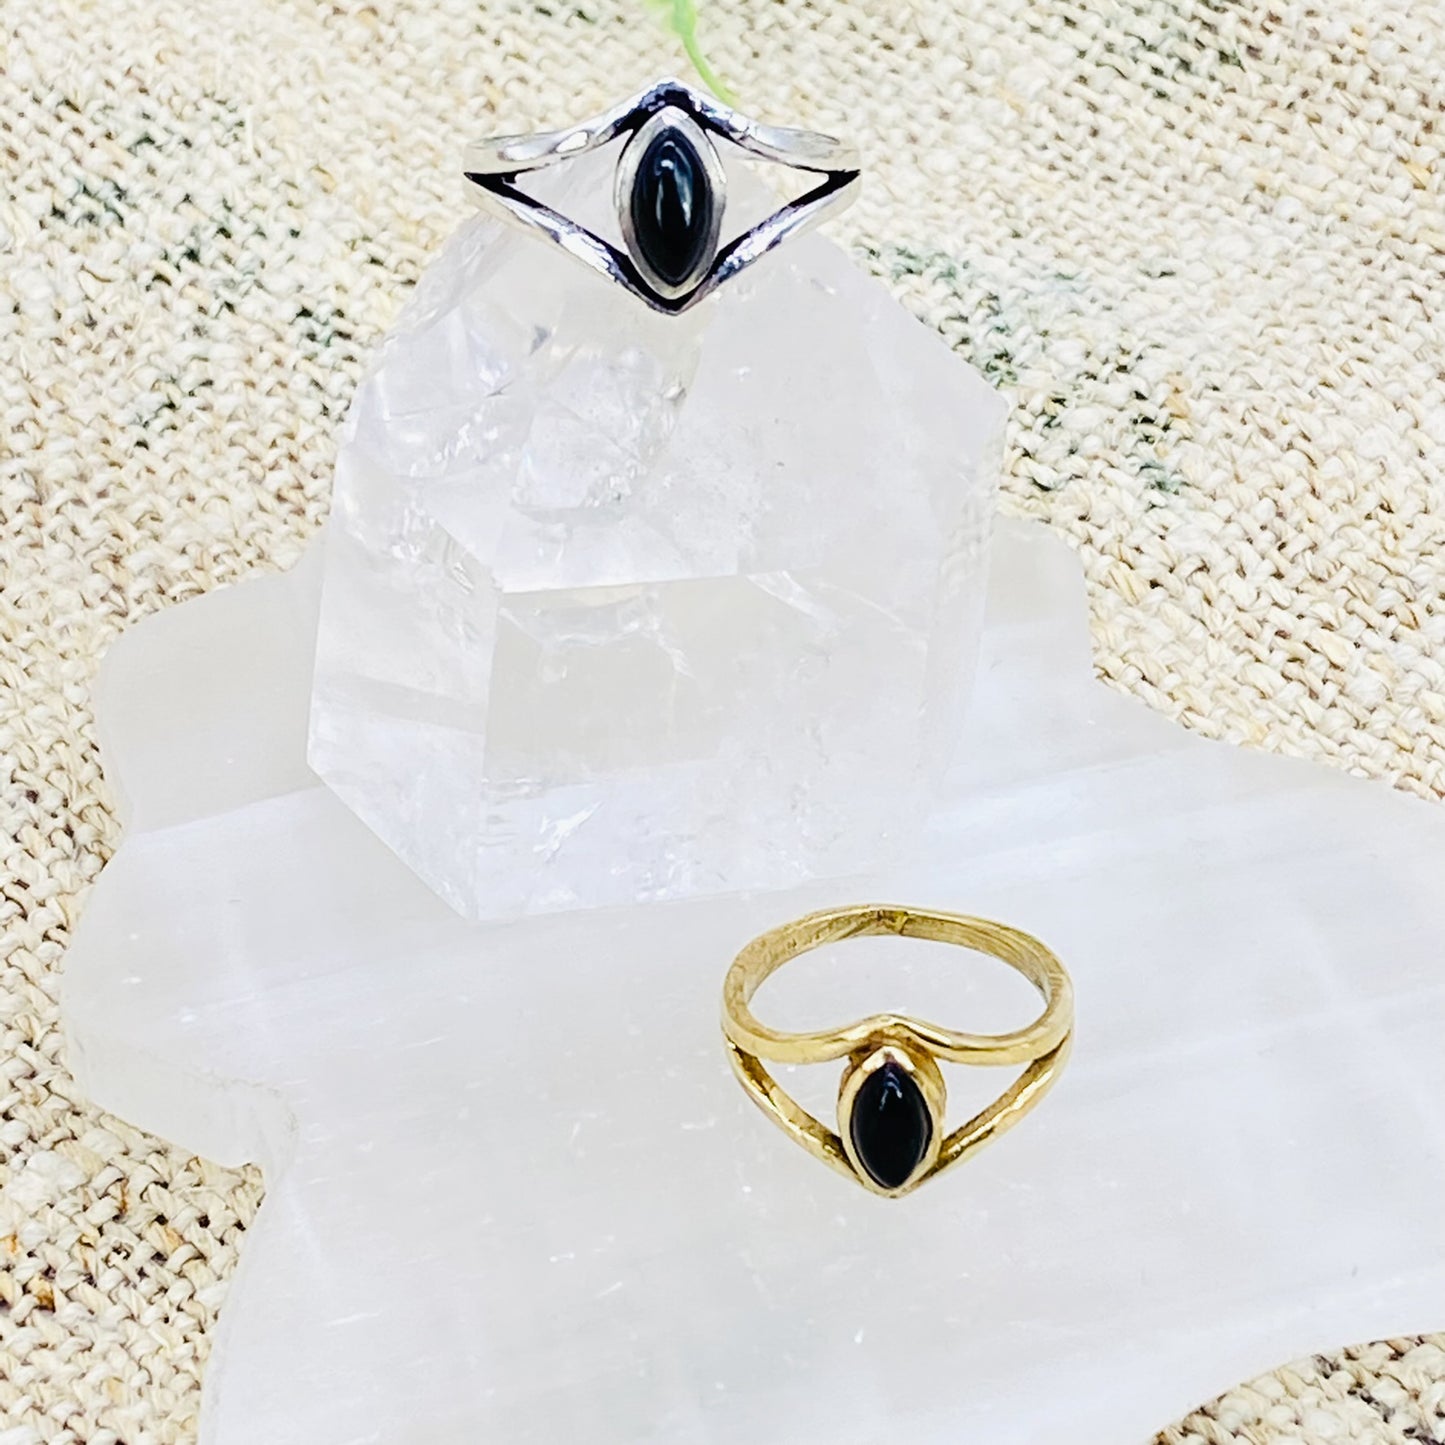 Sterling Silver Ring, Gold Filled Rings, Non Tarnish Rings, Crystal Rings, Bohemian Jewelry, Ethnic Jewelry, Unique Rings, Healing Crystal